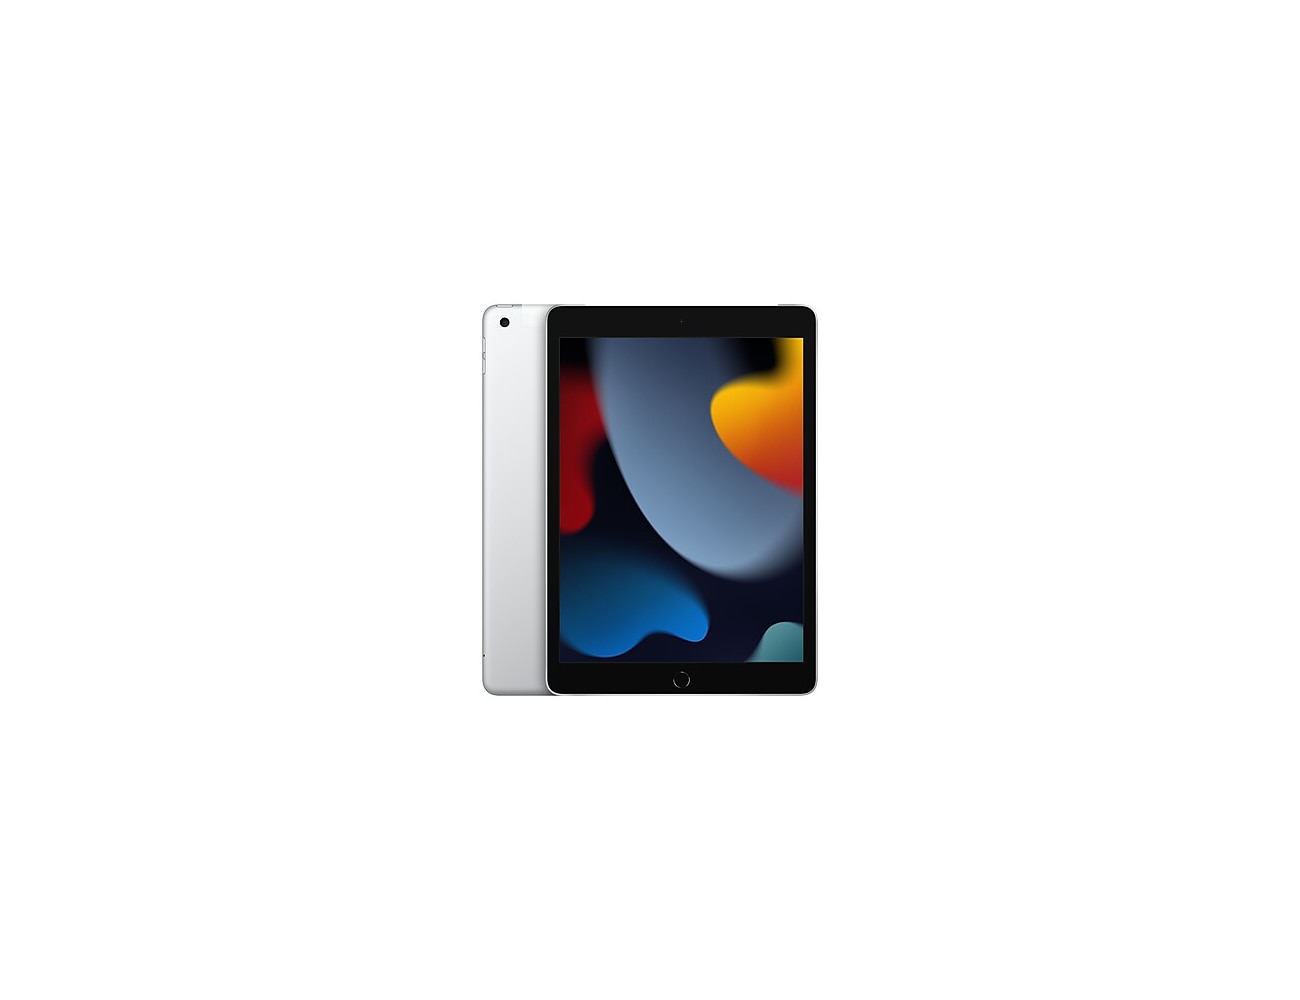 Apple Ipad Pro 11" WIFI Space Gray (Latest Model 2021) $699  Staples- Select Stores Potential Price Match